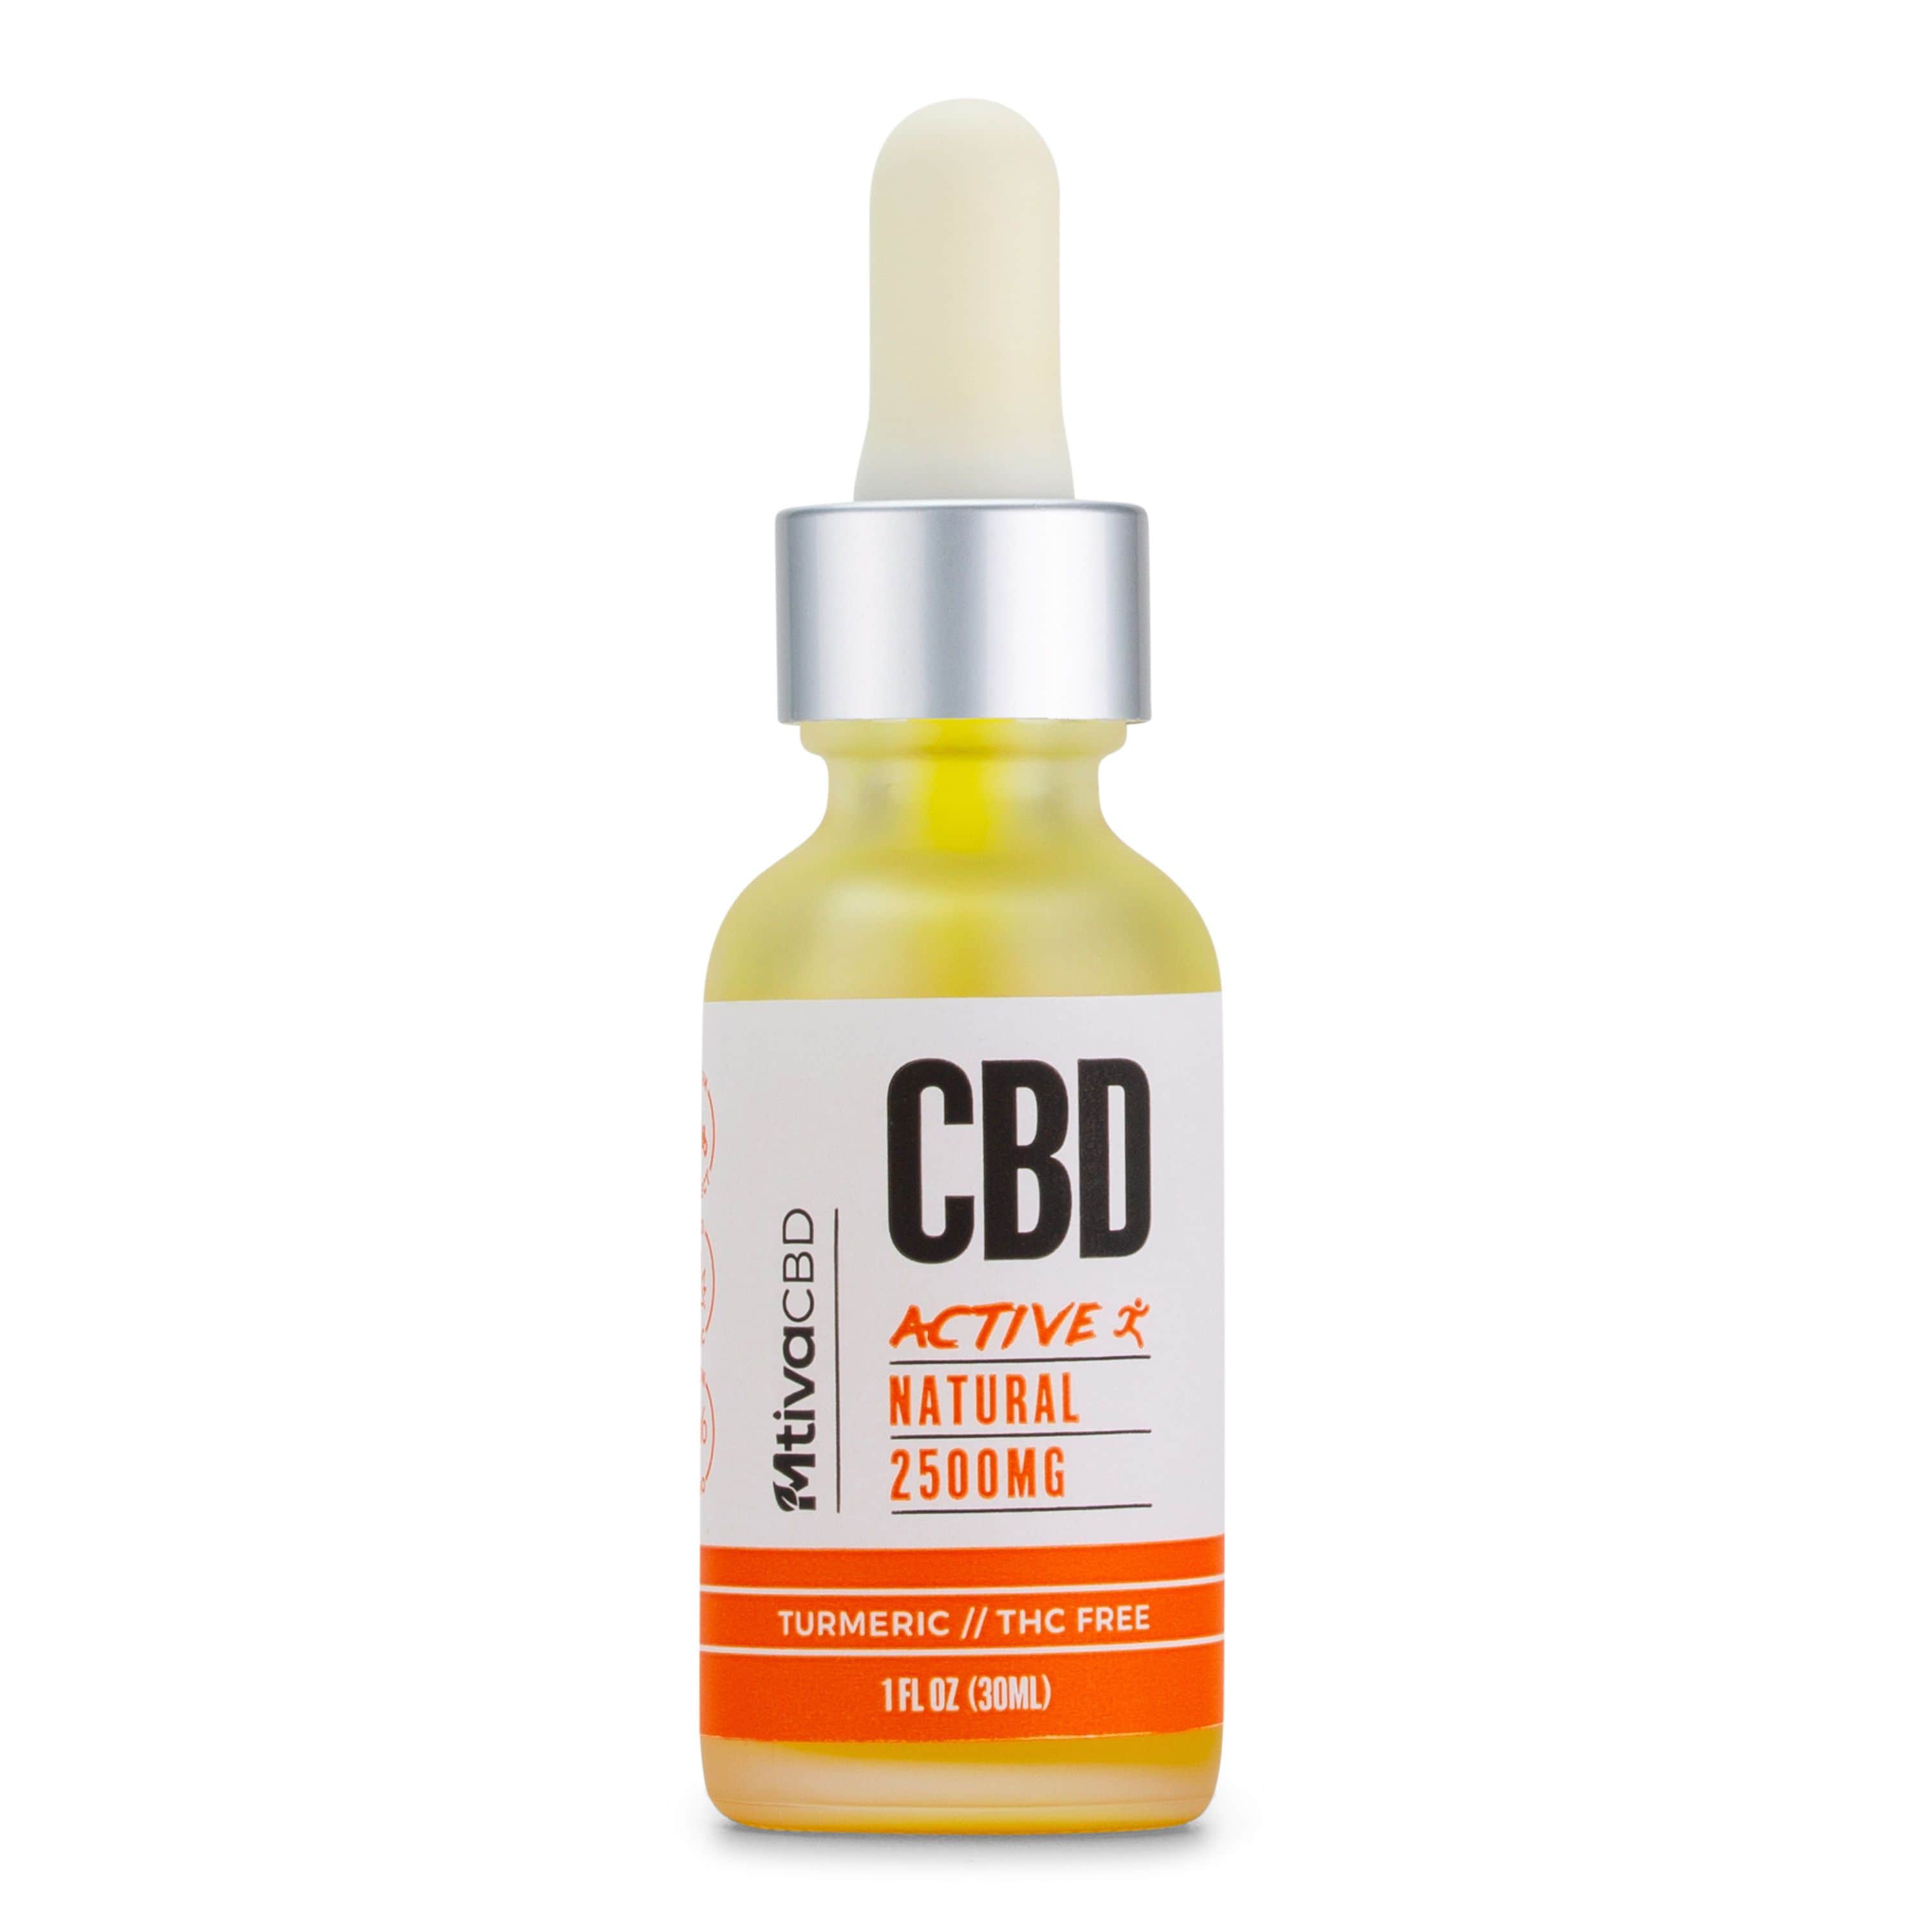 Active CBD Oil with Turmeric, Ginger and Black Pepper 2500mg CBD